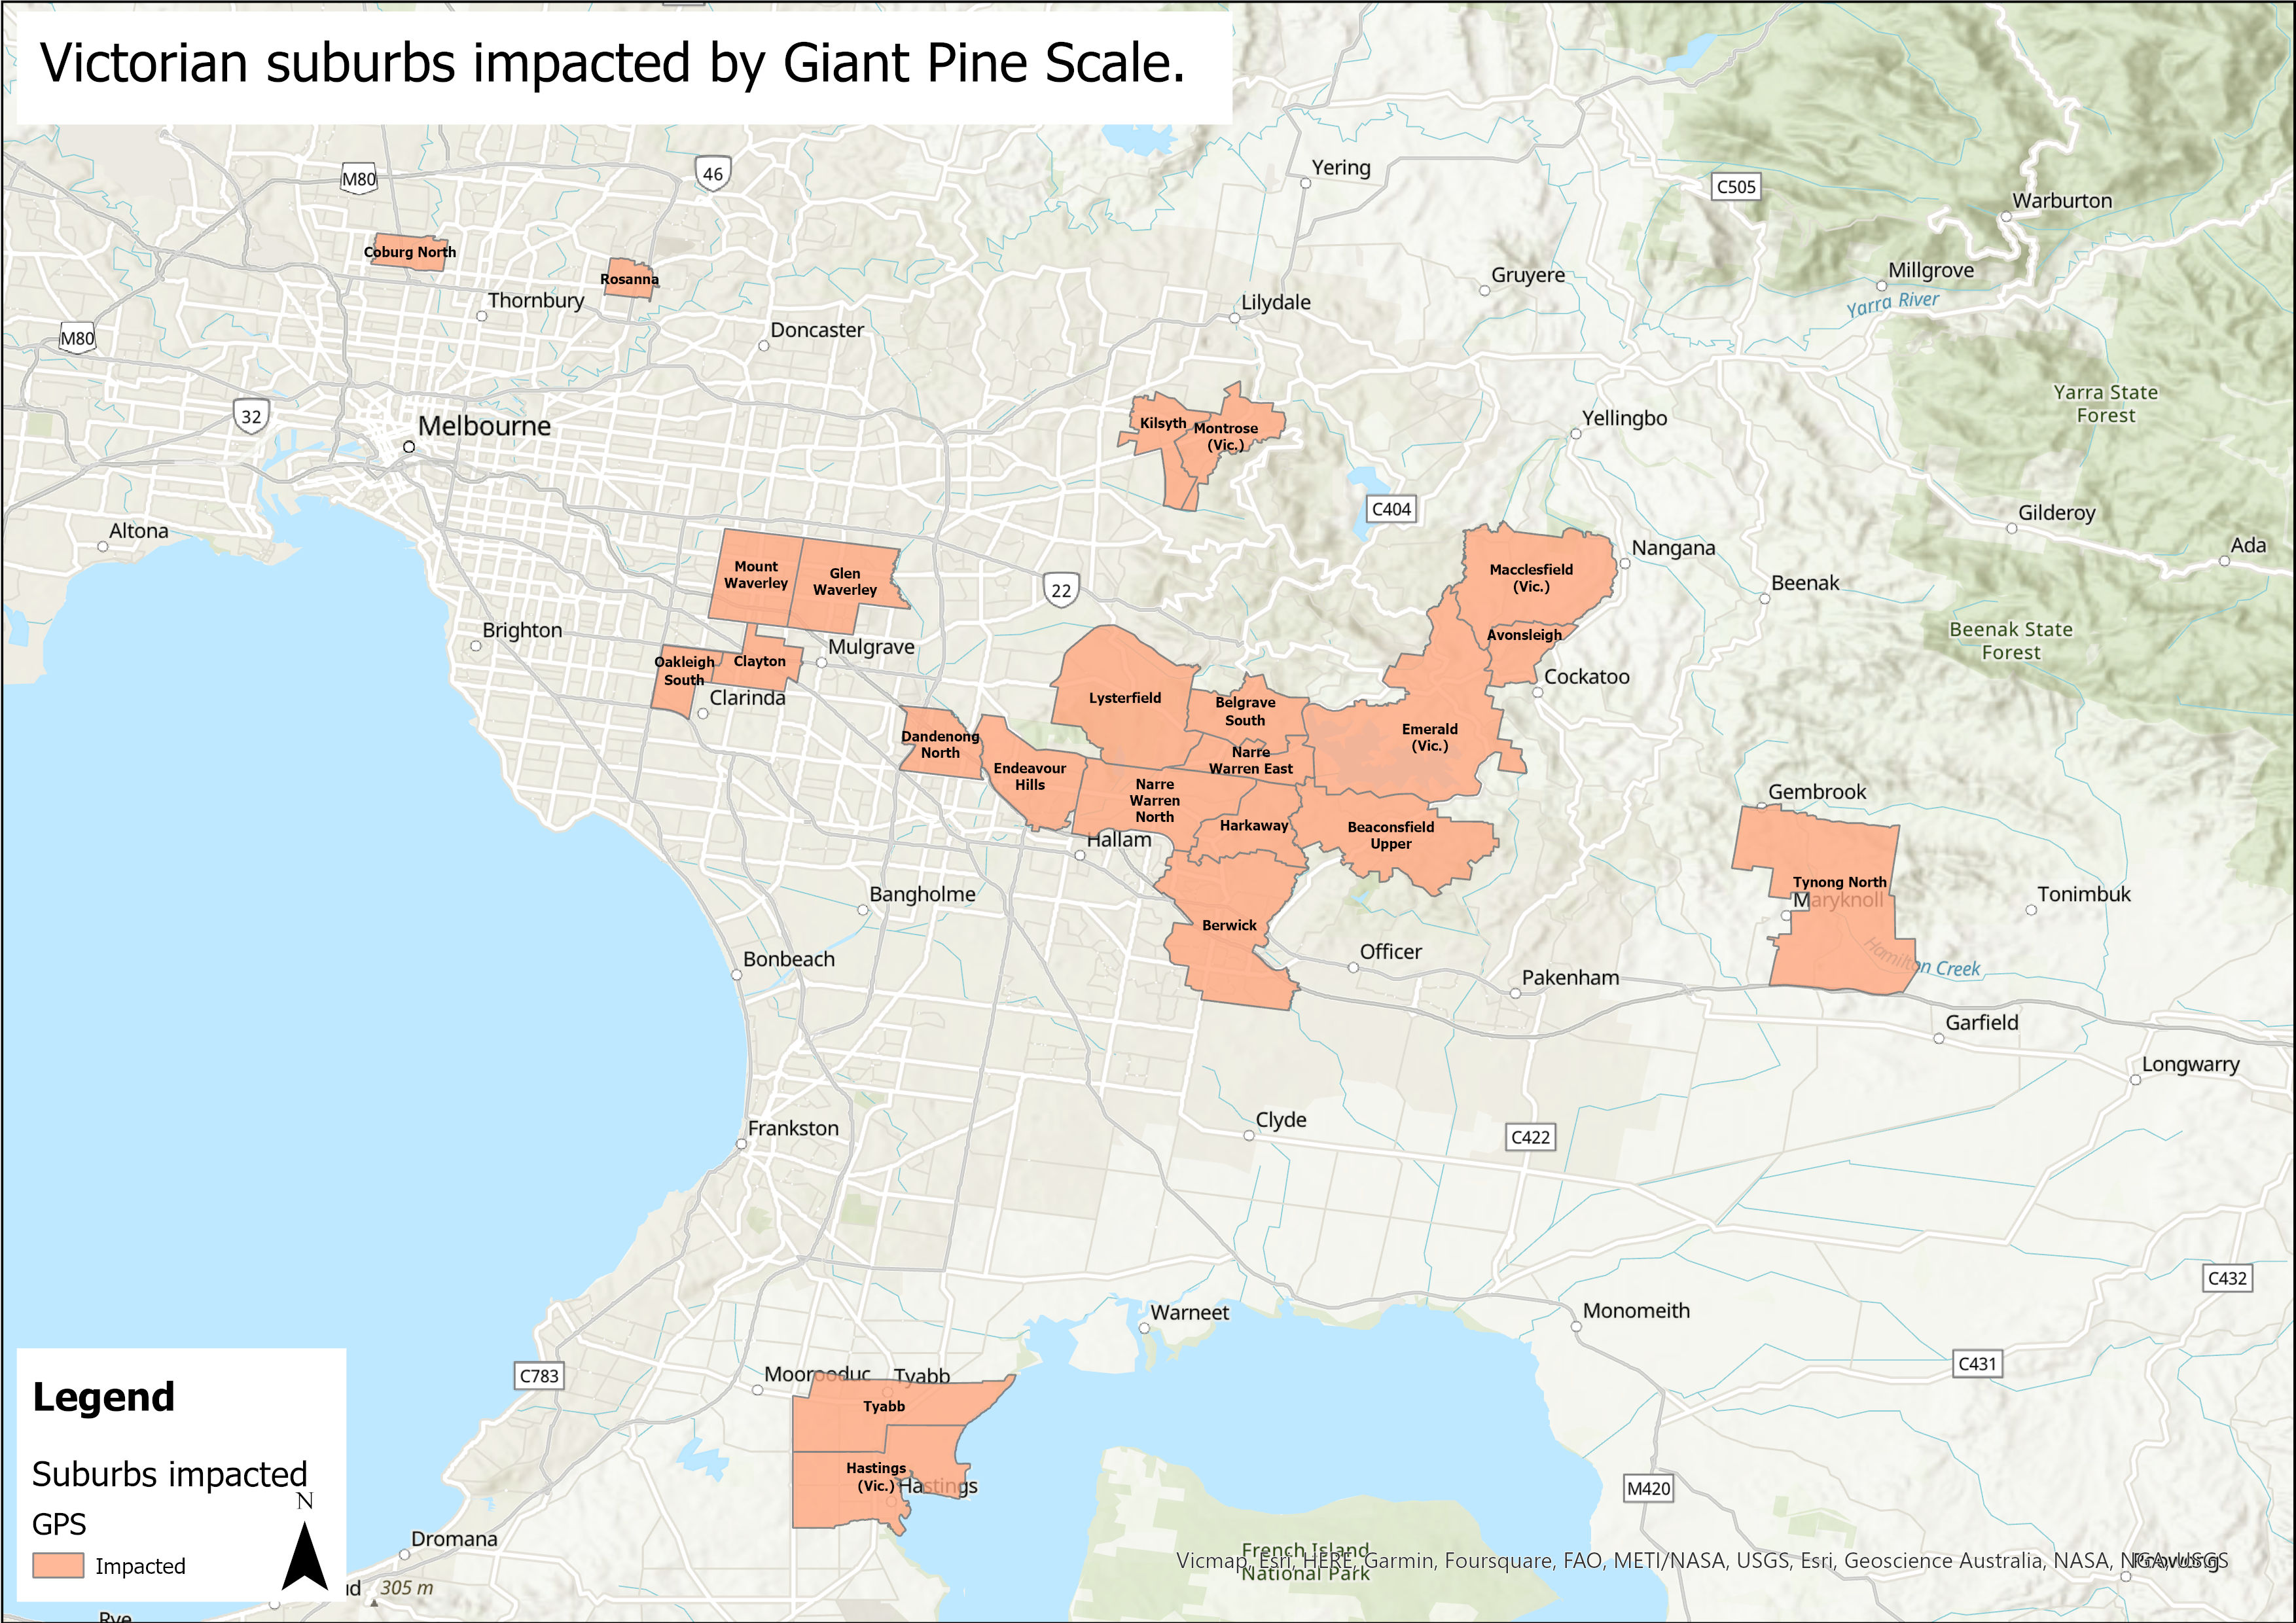 Map with orange shading showing suburbs of Victoria impacted by Giant Pine Scale at the time of publishing including Coburg North, Rosanna, Kilsyth, Montrose, Mount Waverley, Clayton, Oakleigh South, Macclesfield, Avonsleigh, Emerald, Belgrave South, Lysterfield, Narre Warren East, Dandenong North, Endeavour Hills, Narre Warren North, Harkaway, Beaconsfield Upper, Berwick, Tynong North, Tyabb and Hastings.